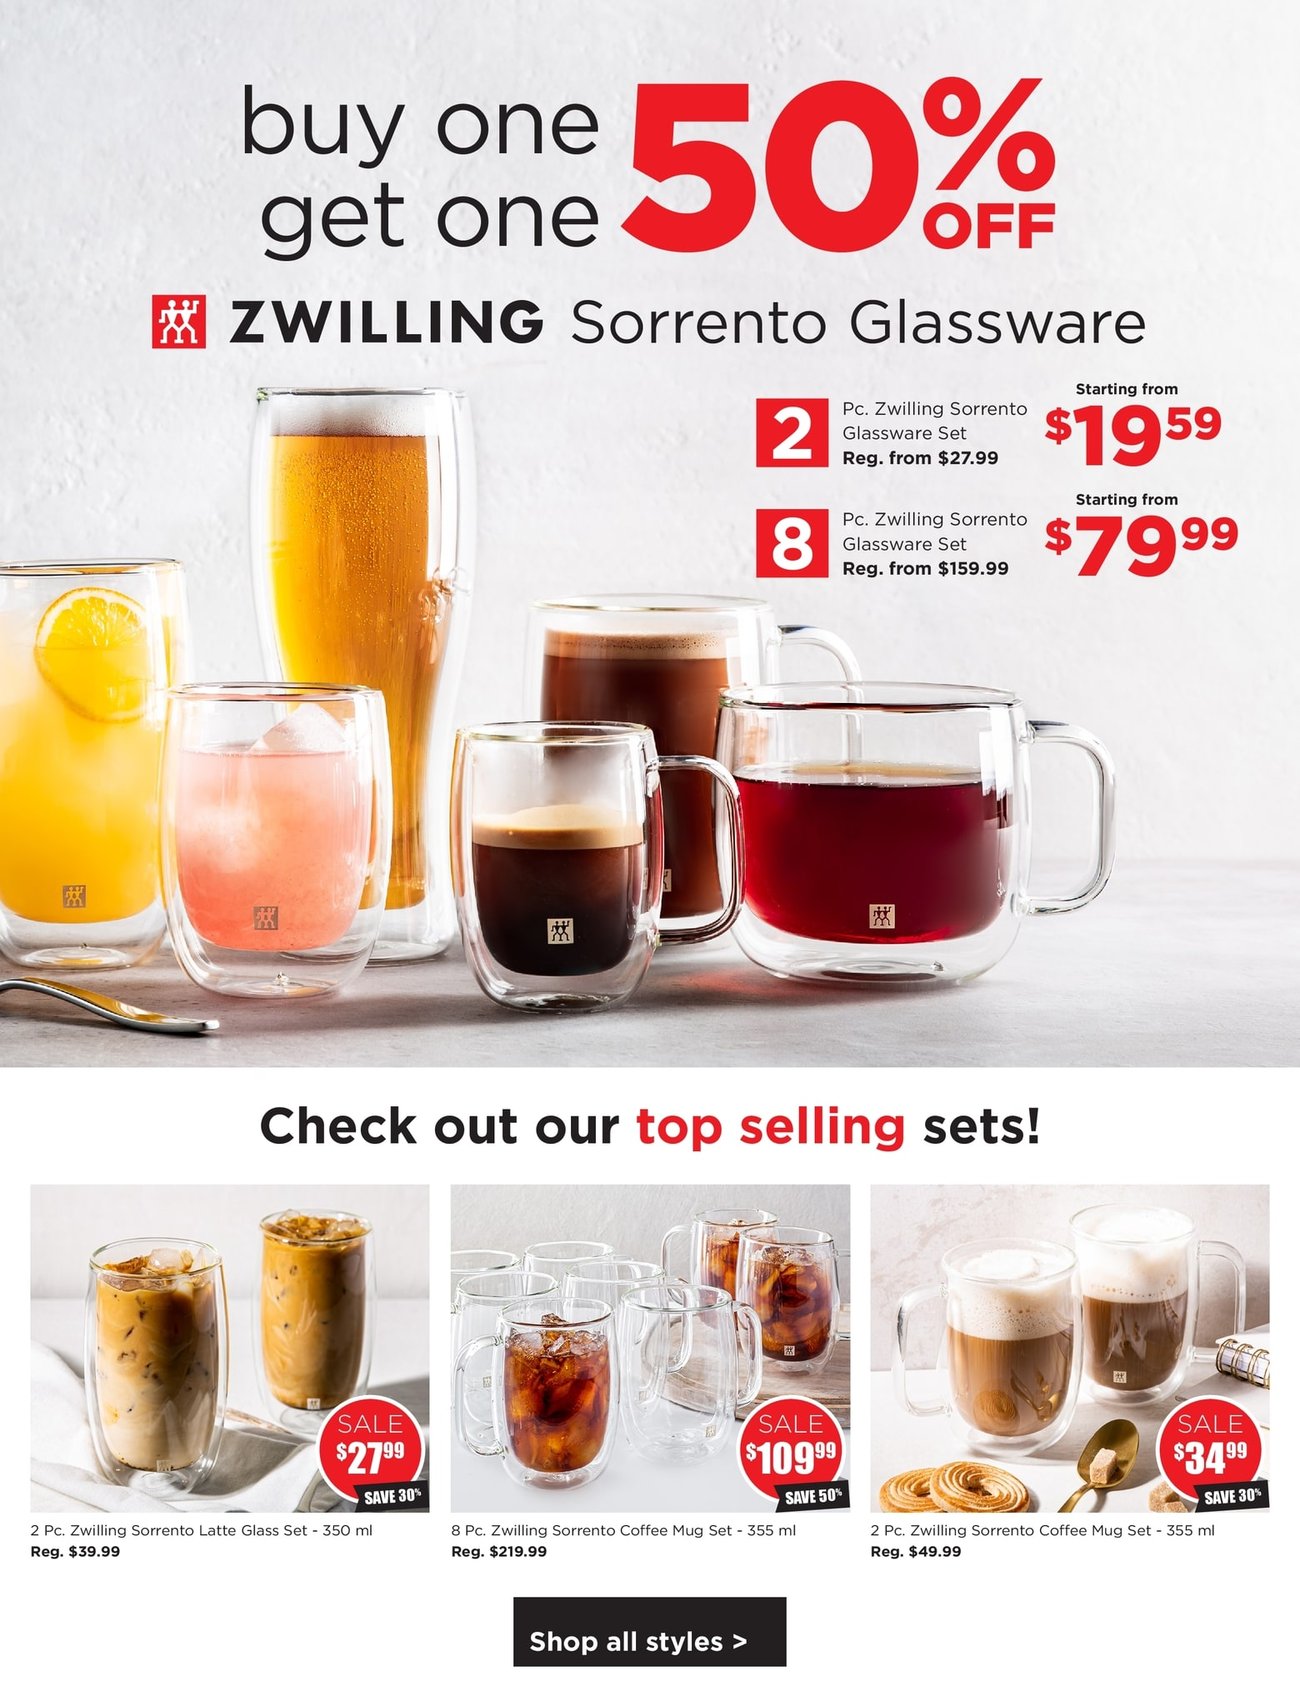 Kitchen Stuff Plus - Everything Cooking Sale - Page 13